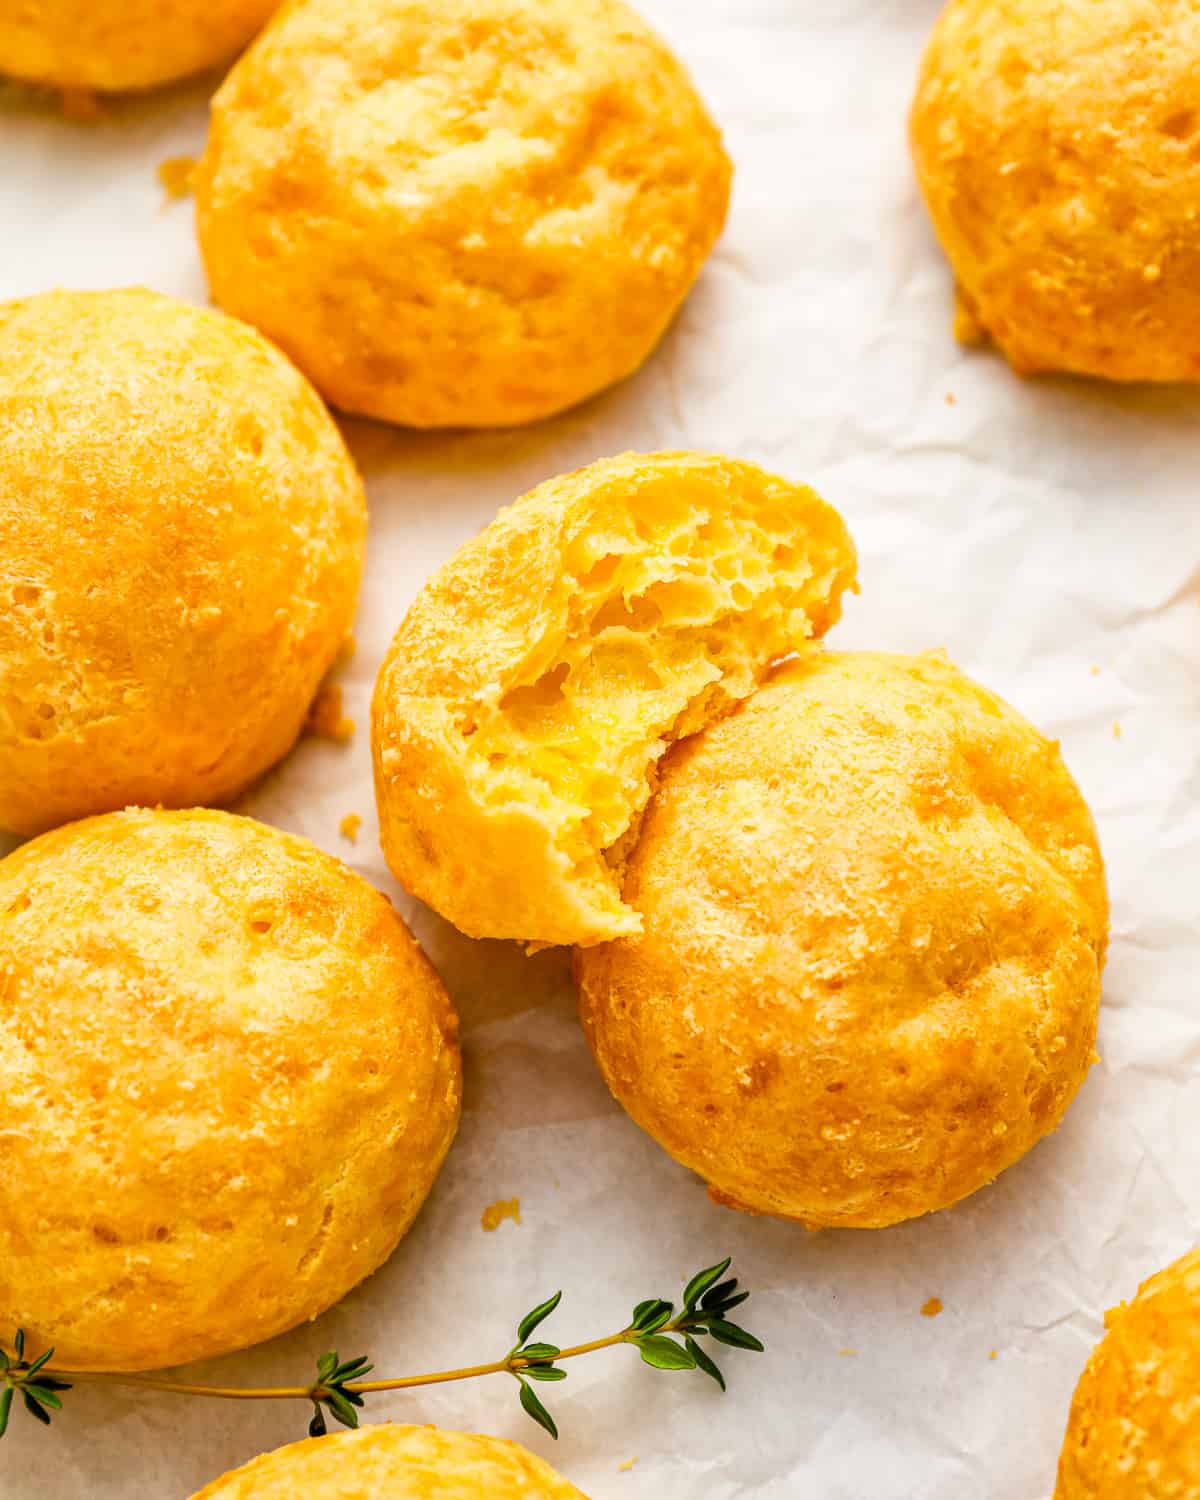 A tray of French cheese puffs (gougeres) with a bite taken out of them.